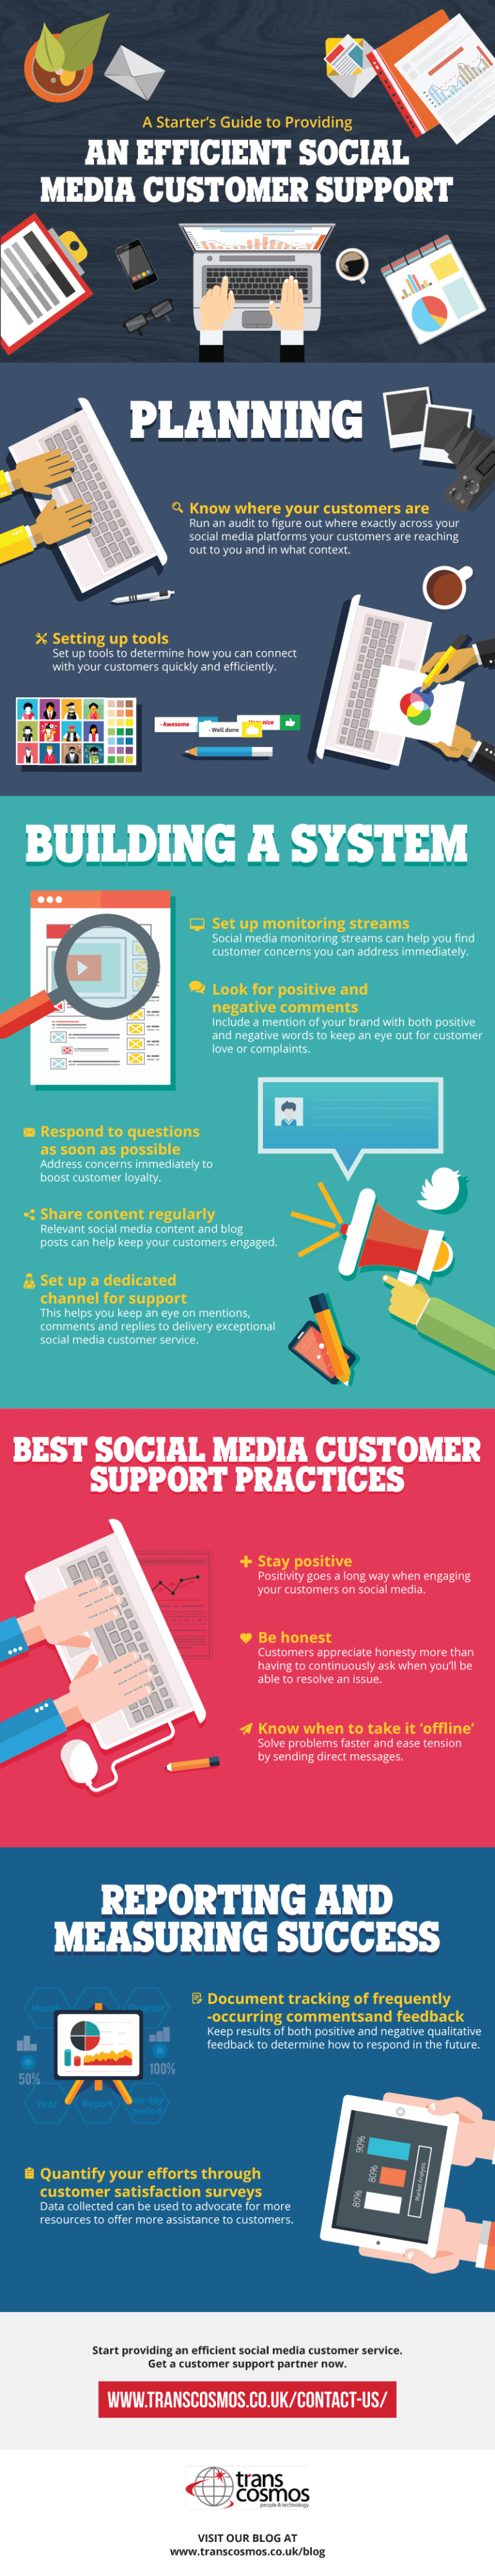 A Starter's Guide to Providing an Efficient Social Media Customer Support